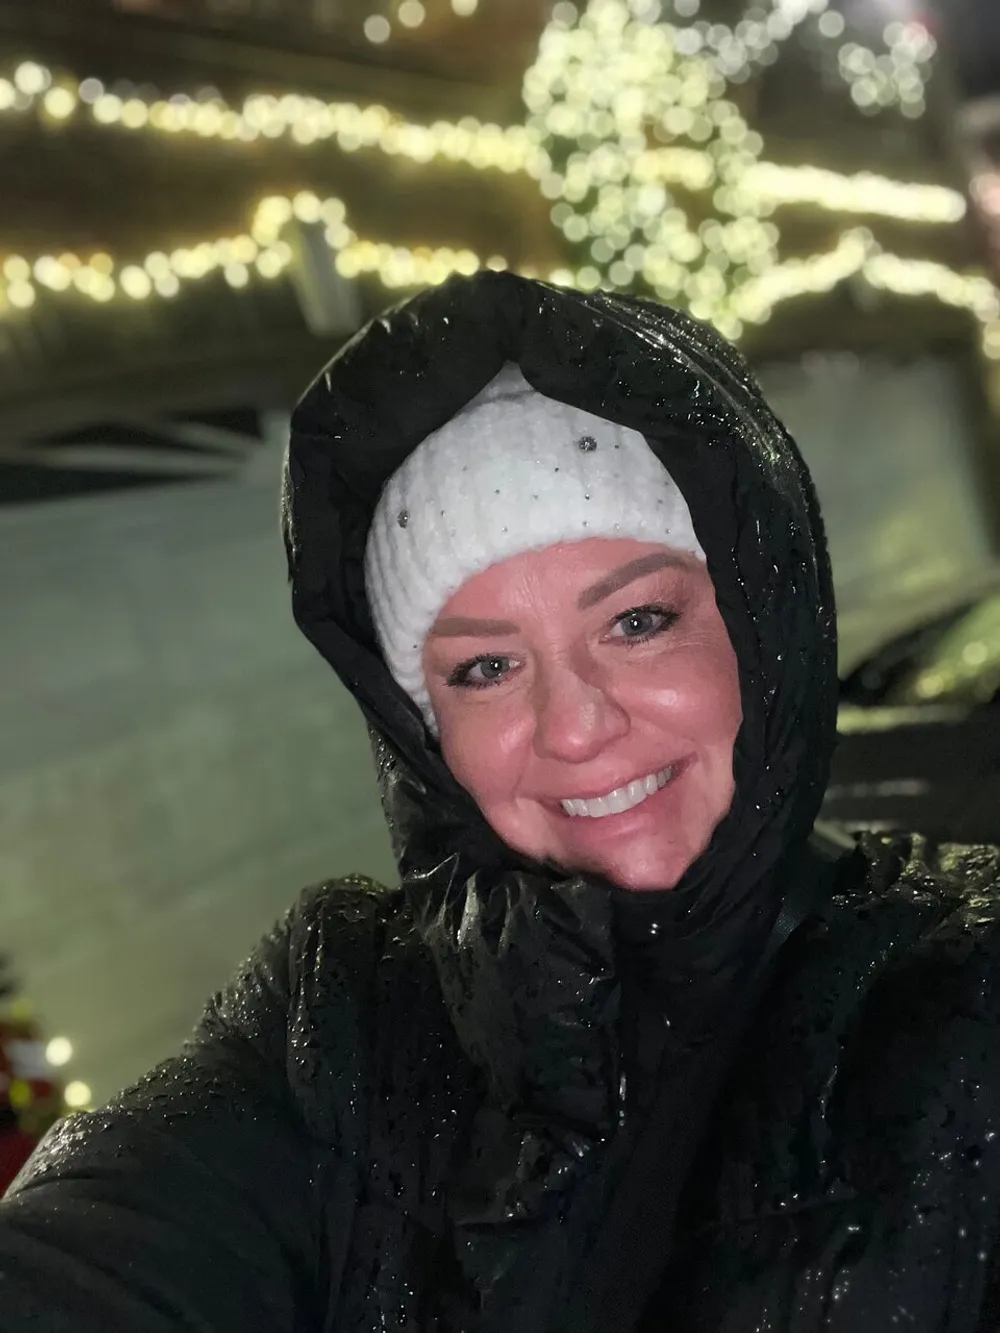 A smiling person in rainwear takes a selfie with twinkling lights in the background on a rainy night